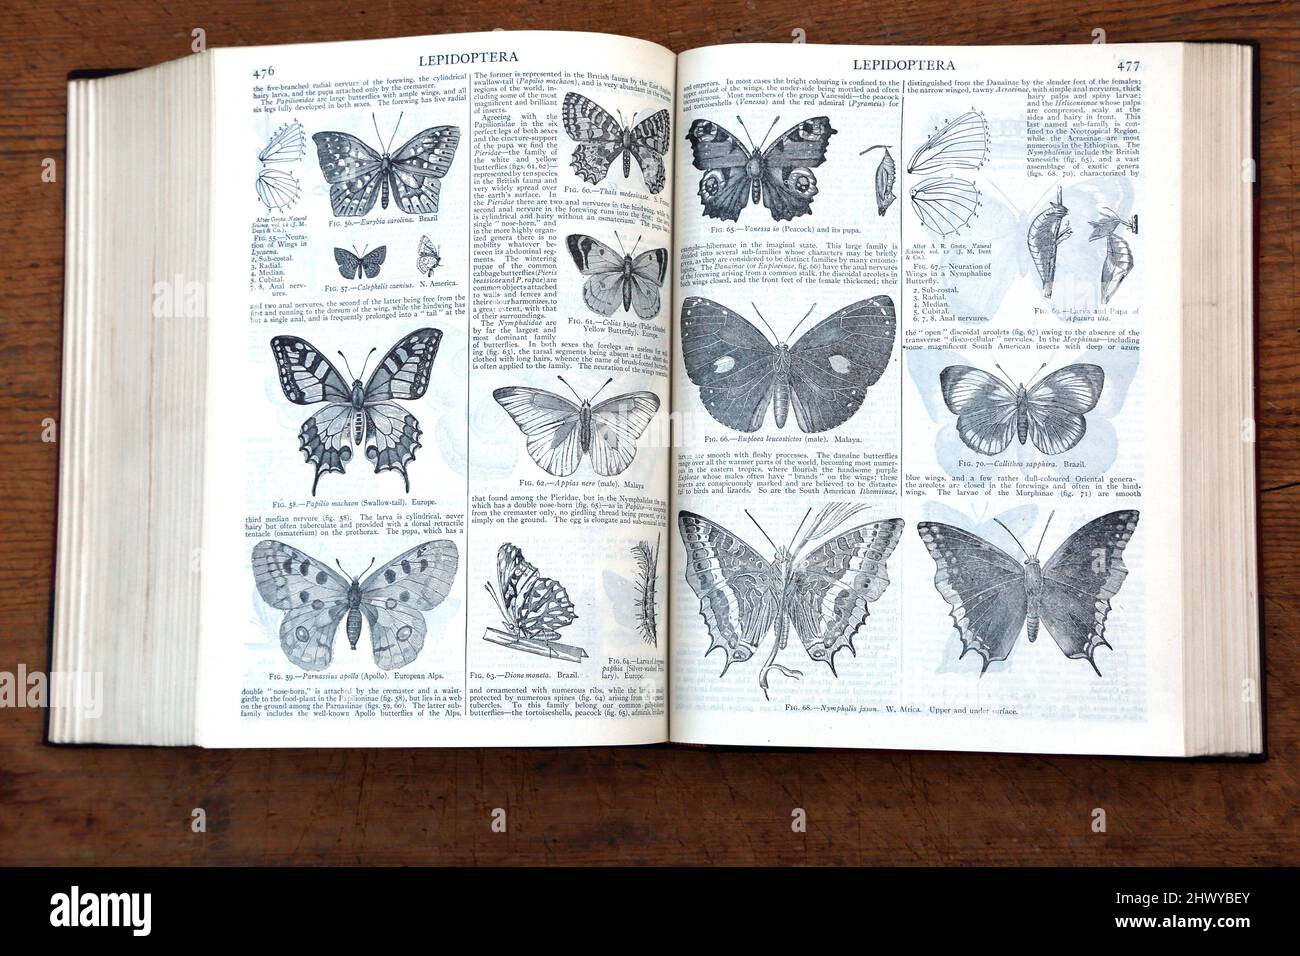 Encyclopedia Britannica Eleventh Edition showing Pages on Lepidoptera Stock Photo